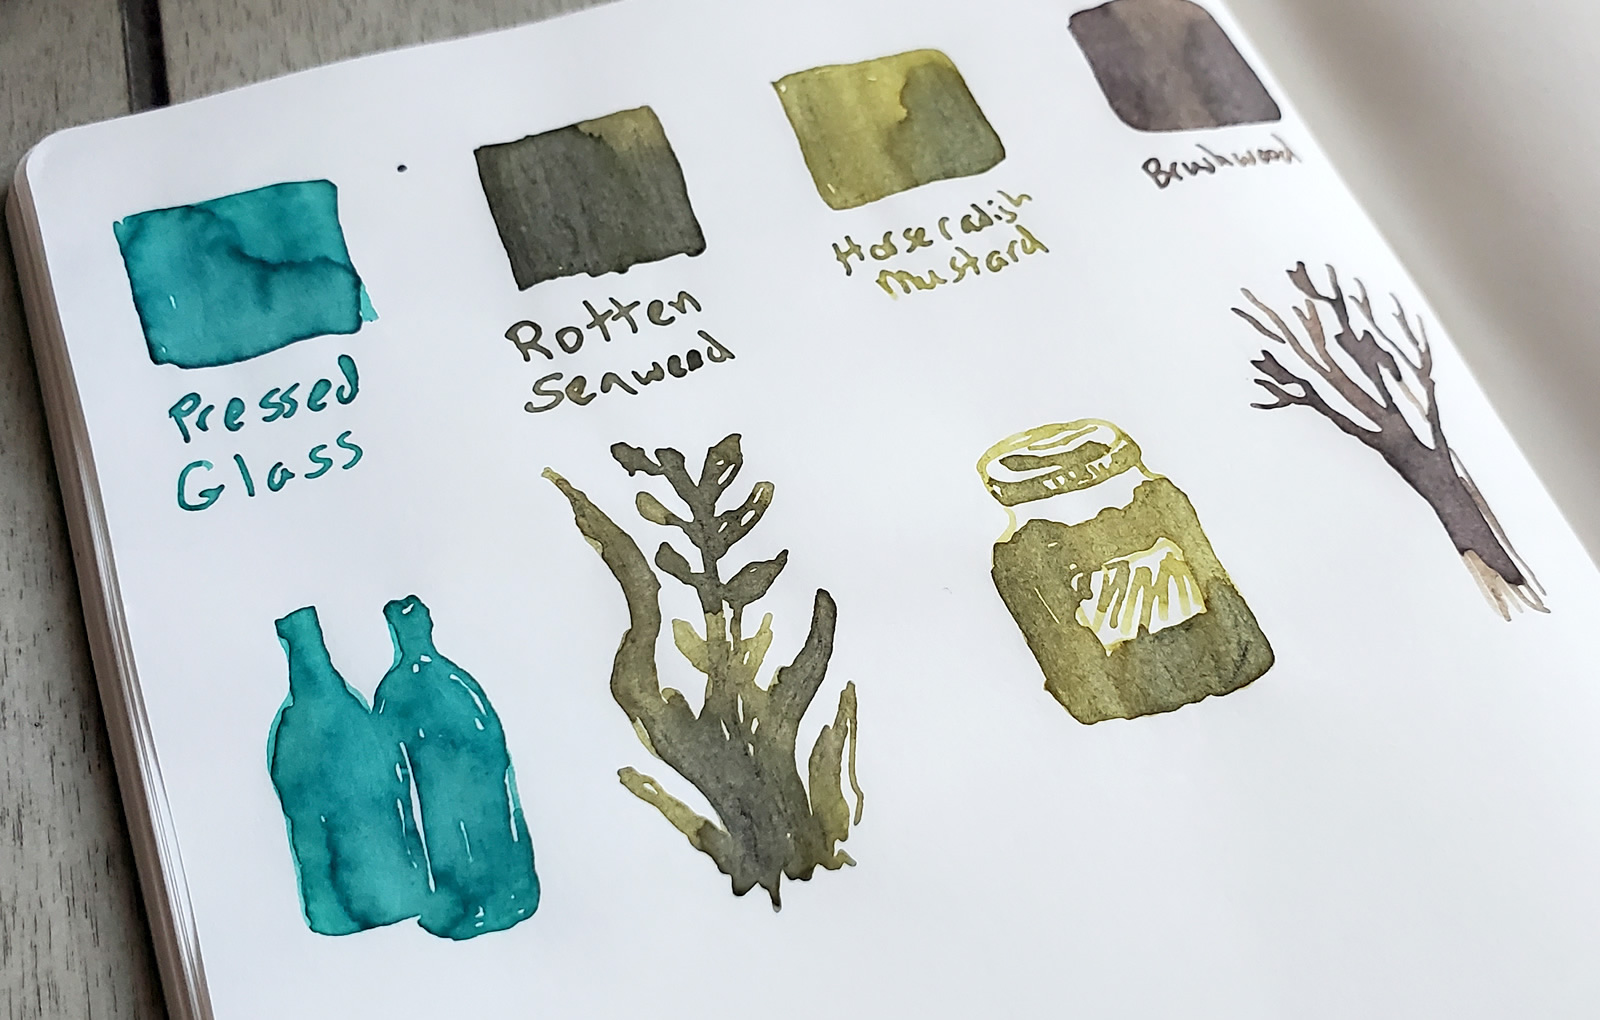 Journal page with ink swatches of four Birmingham Pen Co. inks, including little sketches related to each ink name. The inks are Pressed Glass, a rich teal, Rotten Seaweed, dark yellow-green, Horseradish Mustard, brighter yellow-green, and Brushwood, a reddish gray-brown.